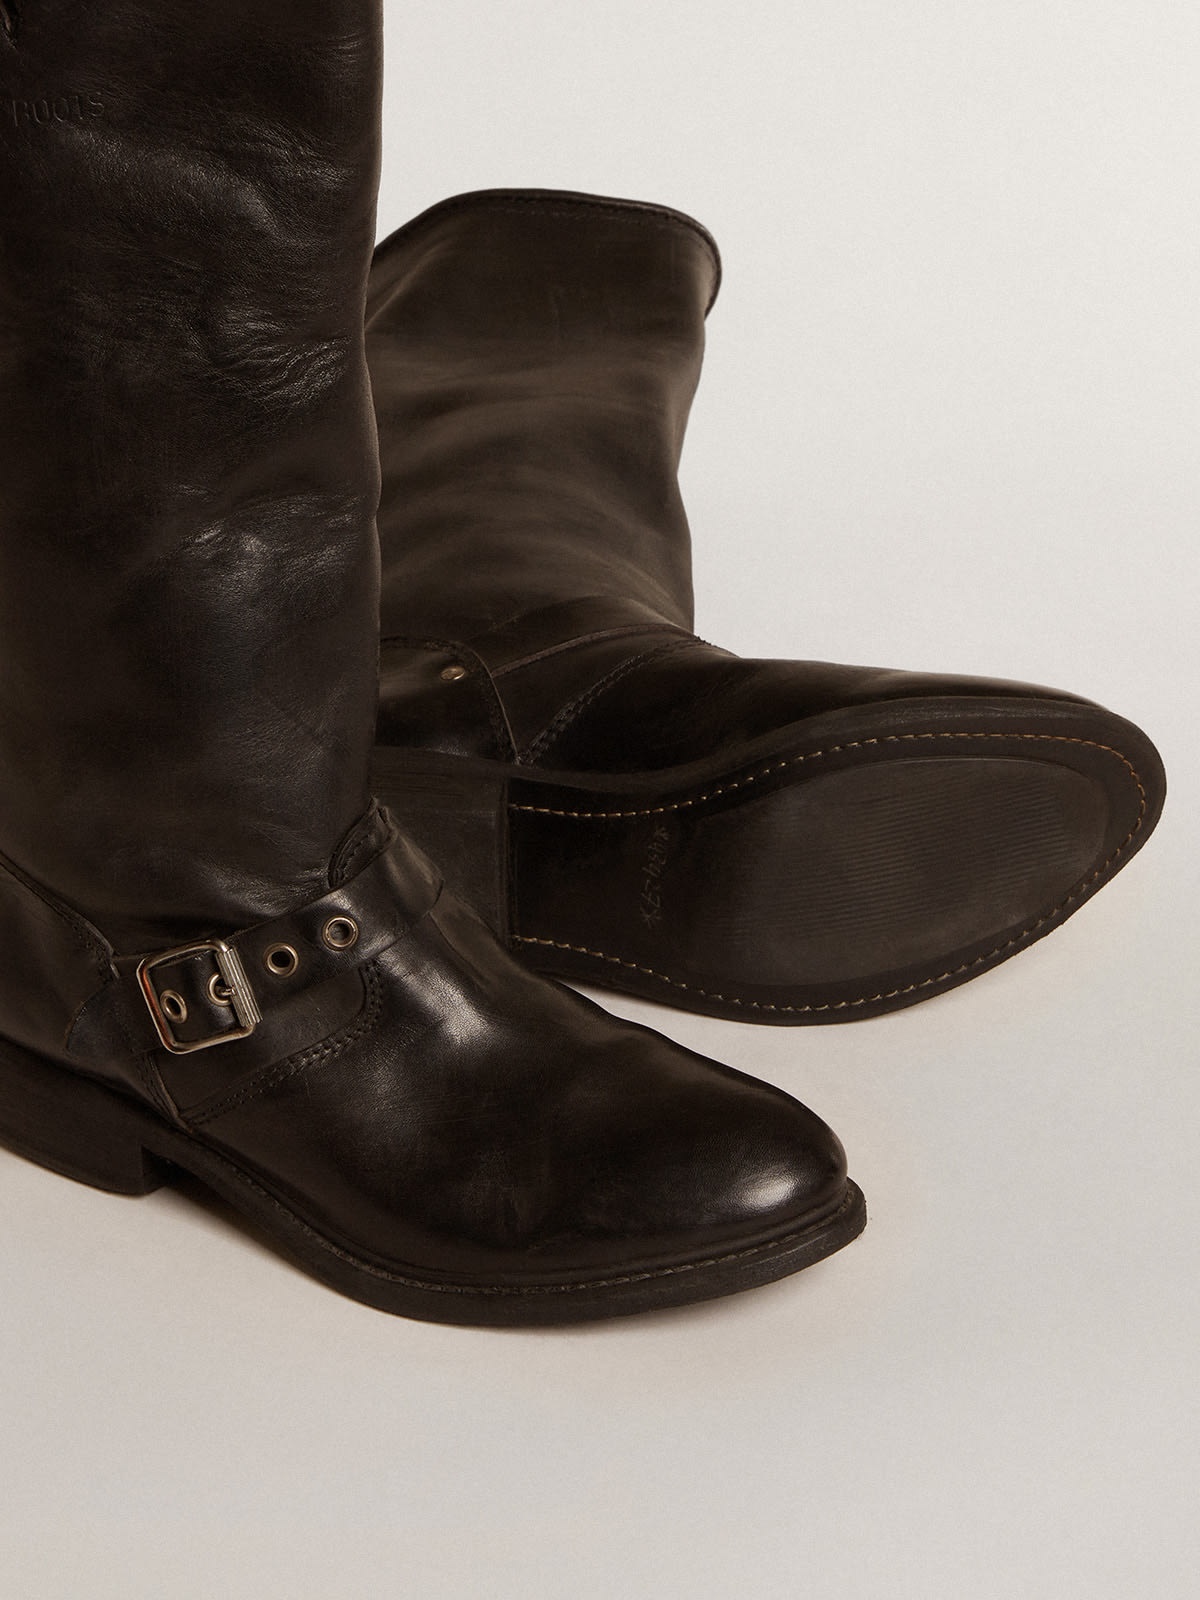 High Biker boots in black leather with silver studs and buckles - 3